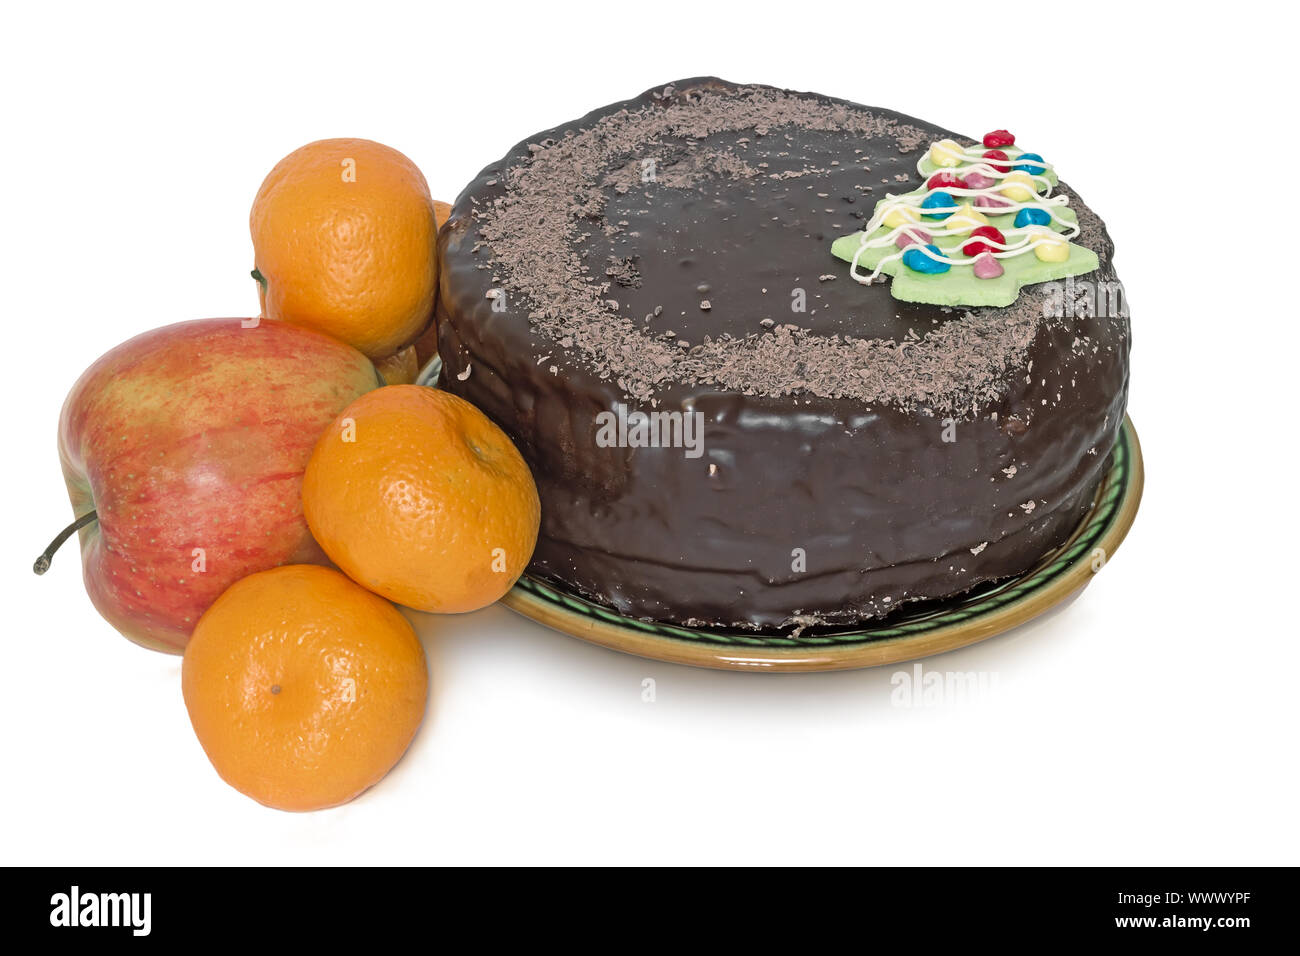 Chocolate cake on a ceramic platter and fruit on a white background. Stock Photo